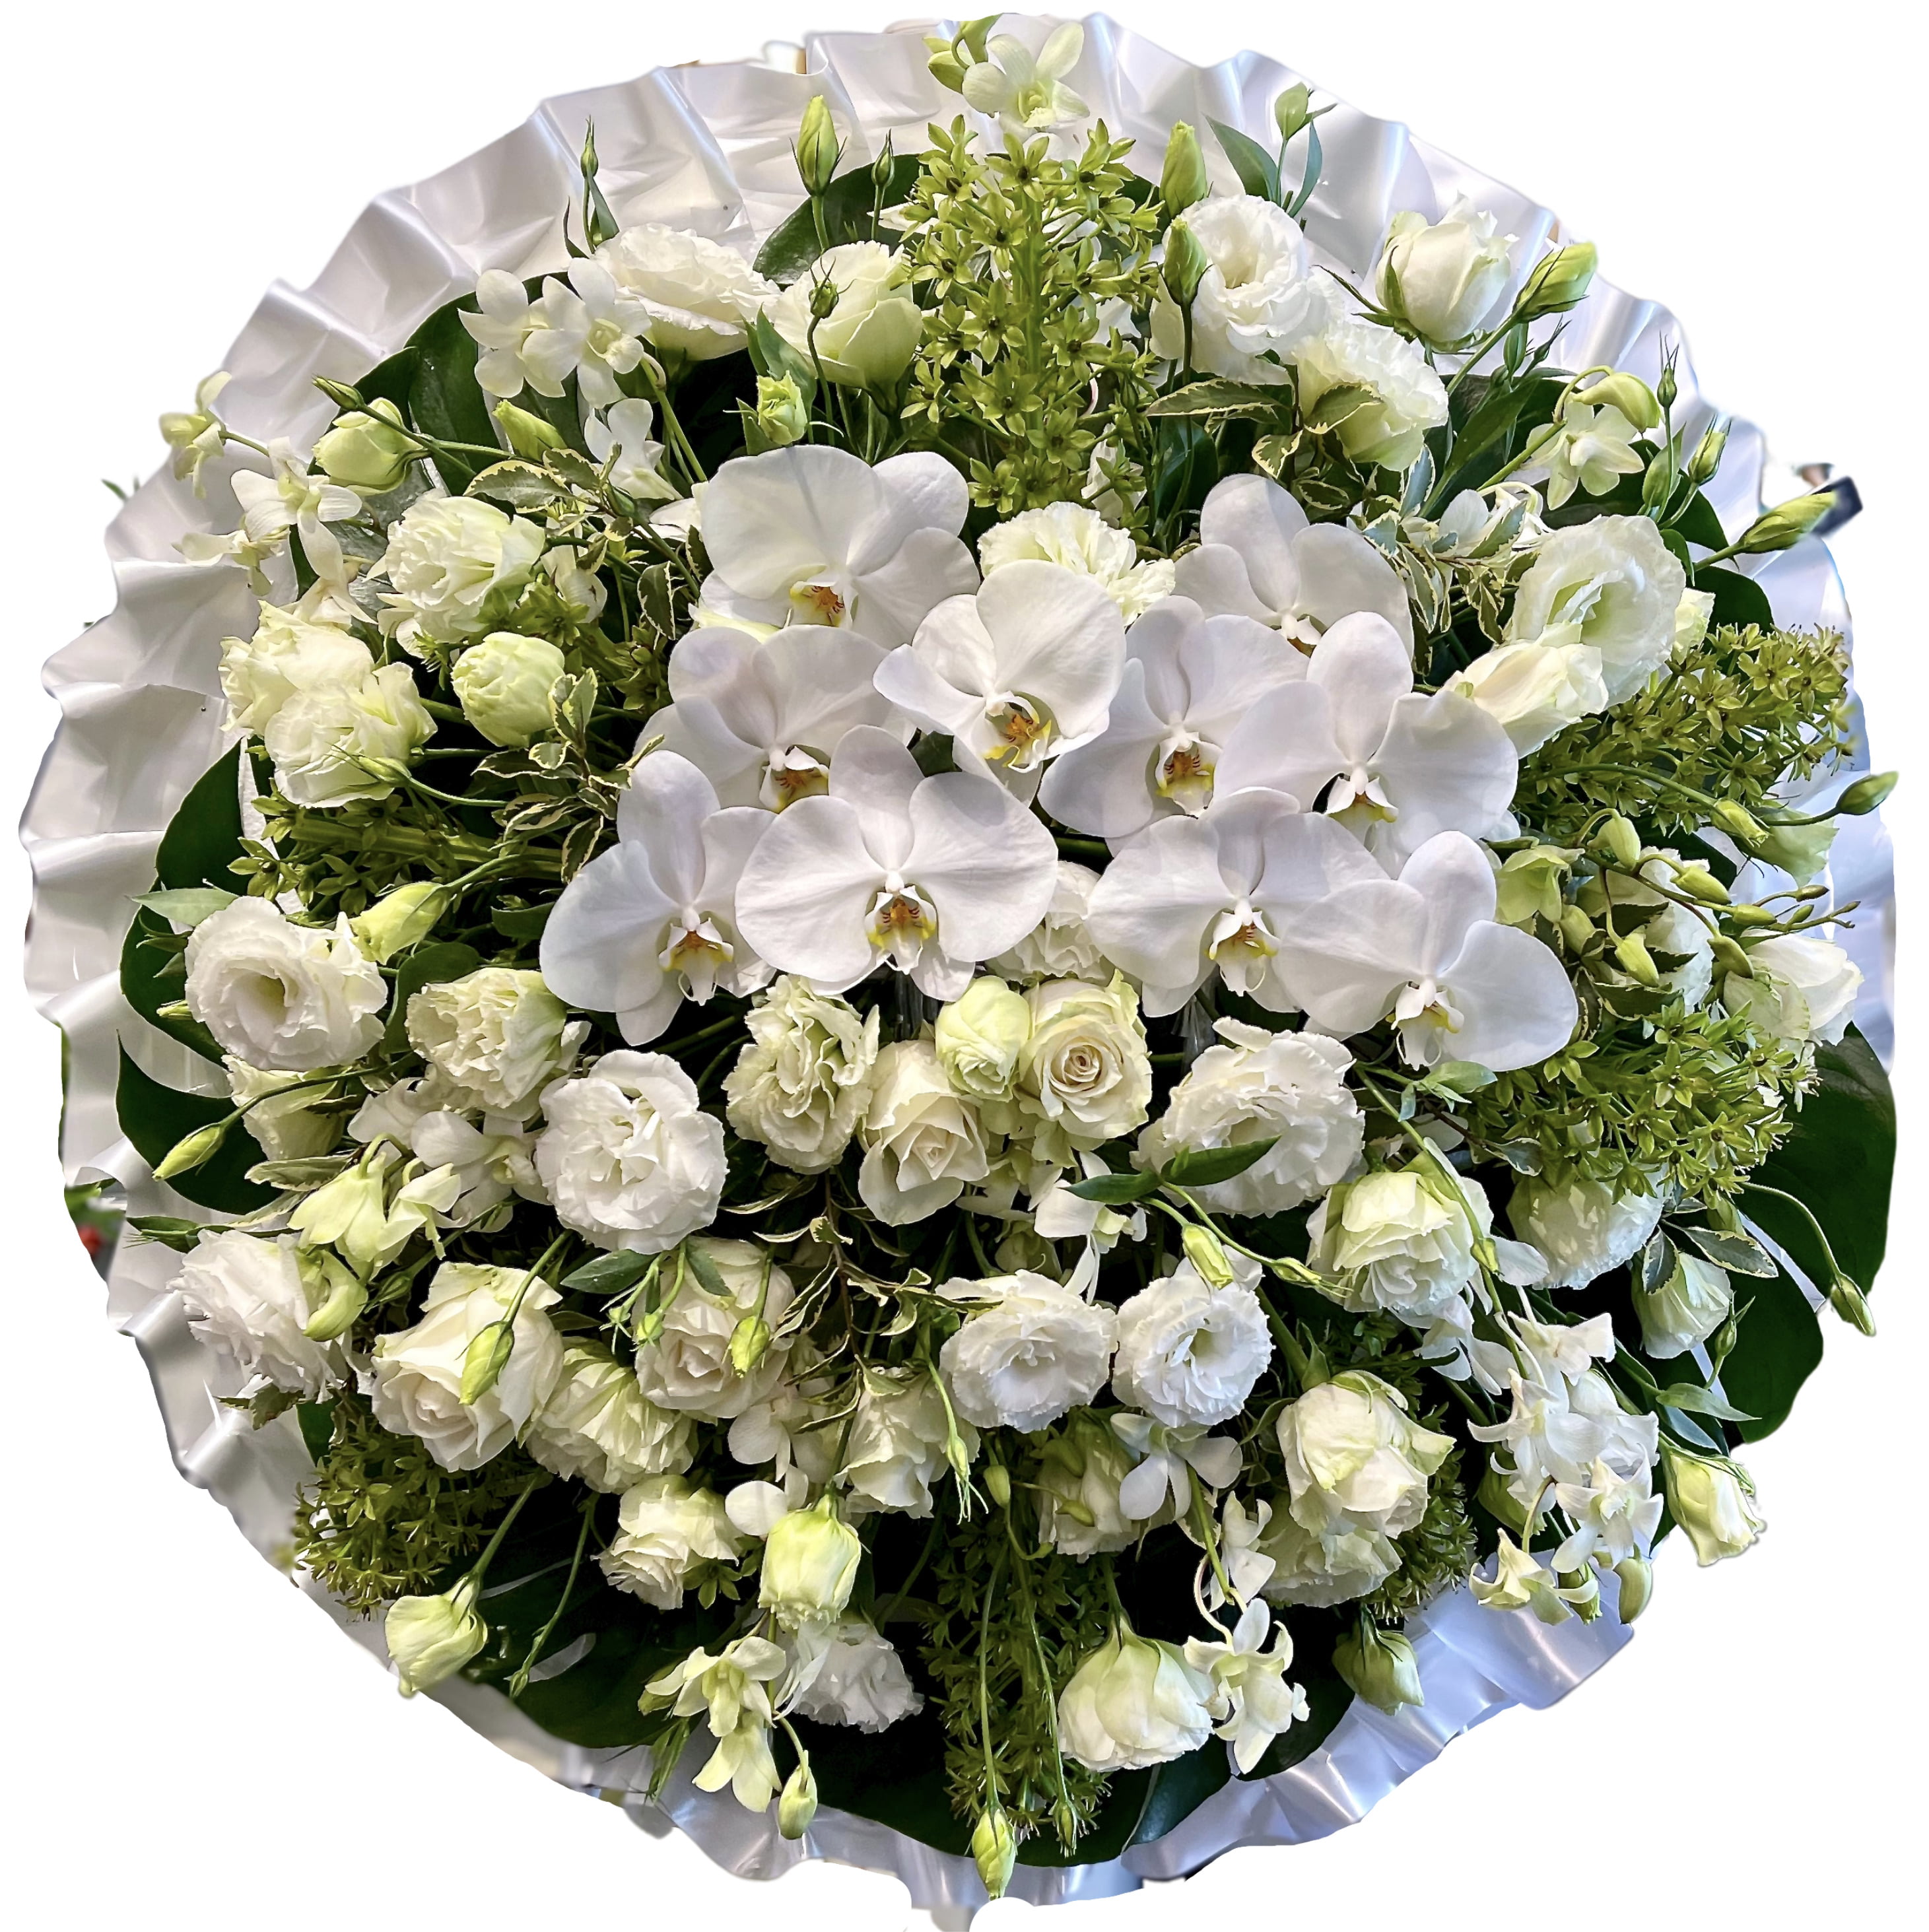 FF-7222 Funeral Asian Wreath Round - Funeral Flowers Guanqing